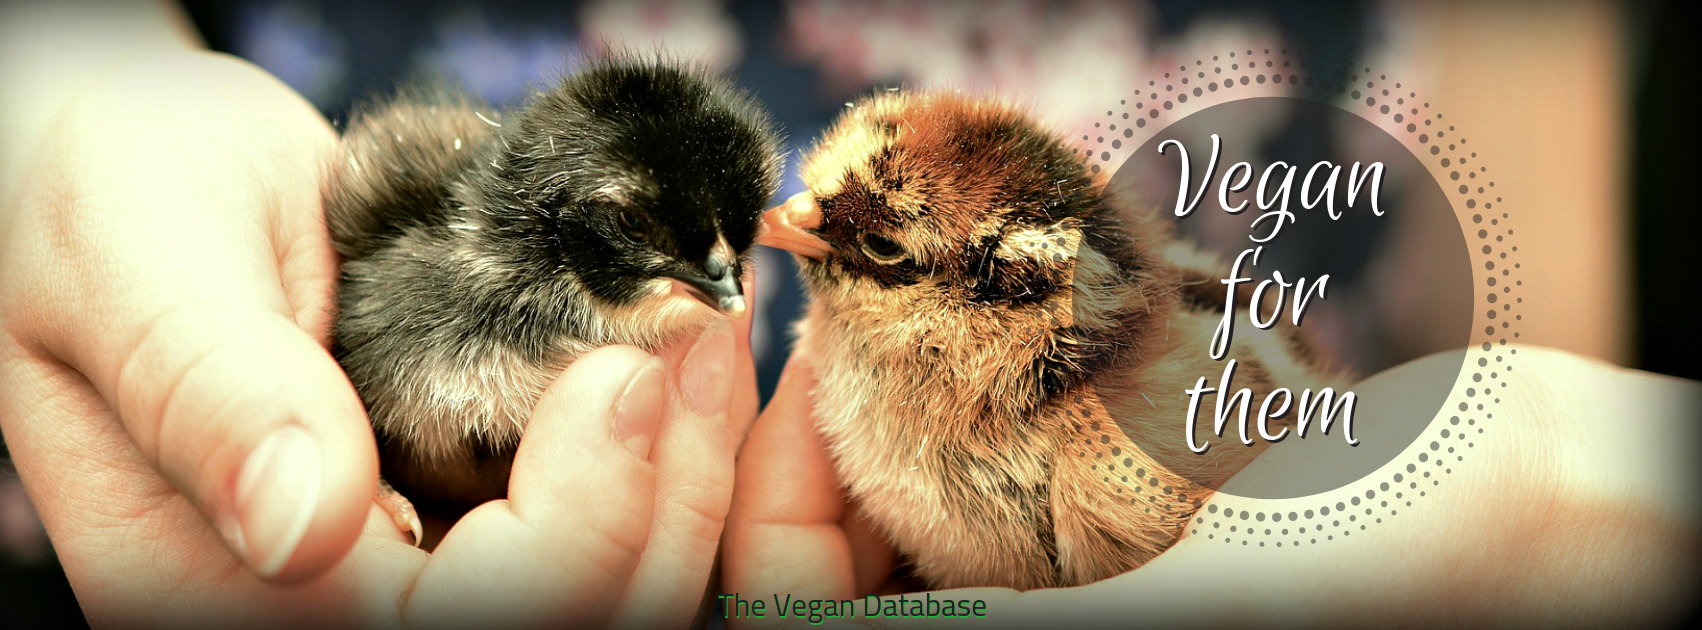 Facebook Cover Baby Chicks - Vegan Cover , HD Wallpaper & Backgrounds